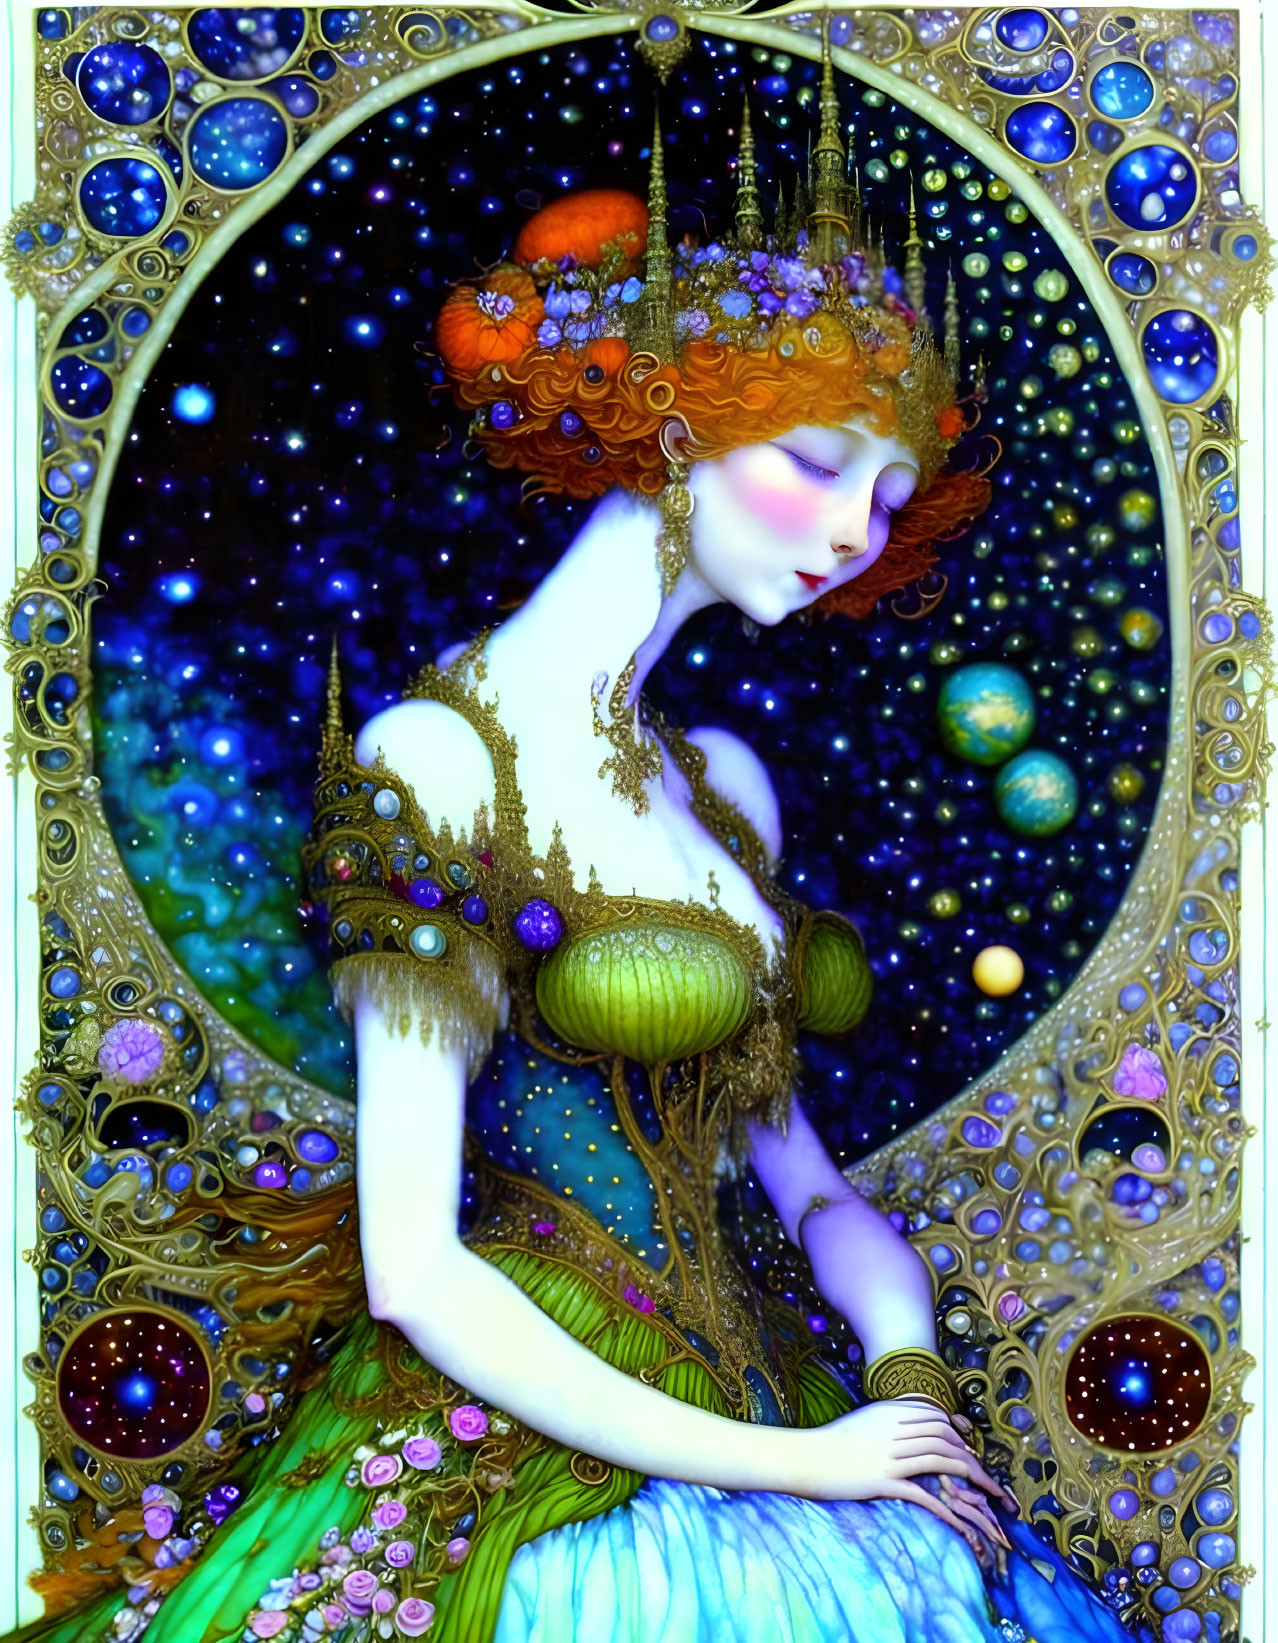 Illustration: Red-haired woman in ornate dress with cosmic backdrop in Art Nouveau style